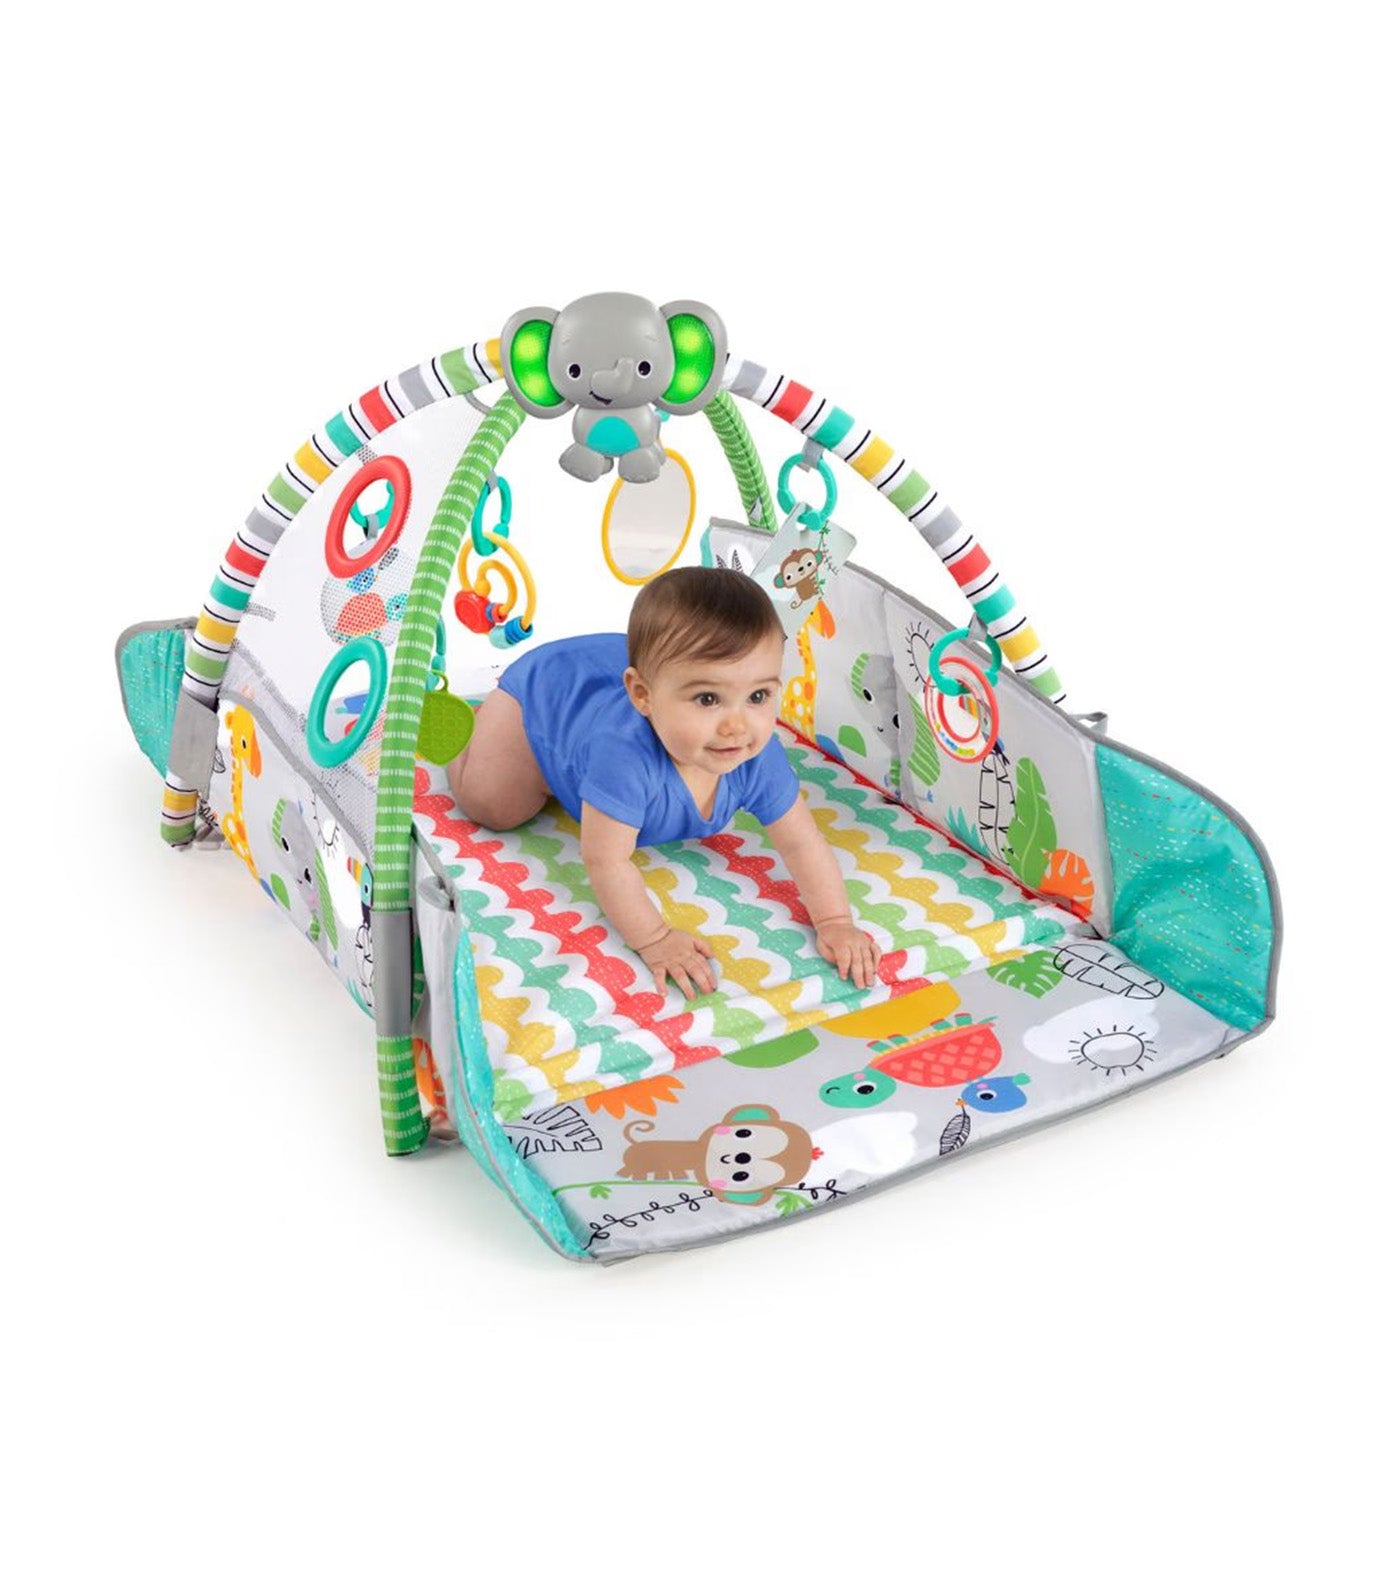 5-in-1 Your Way Ball Play Baby Activity Gym and Ball Pit - Totally Tropical